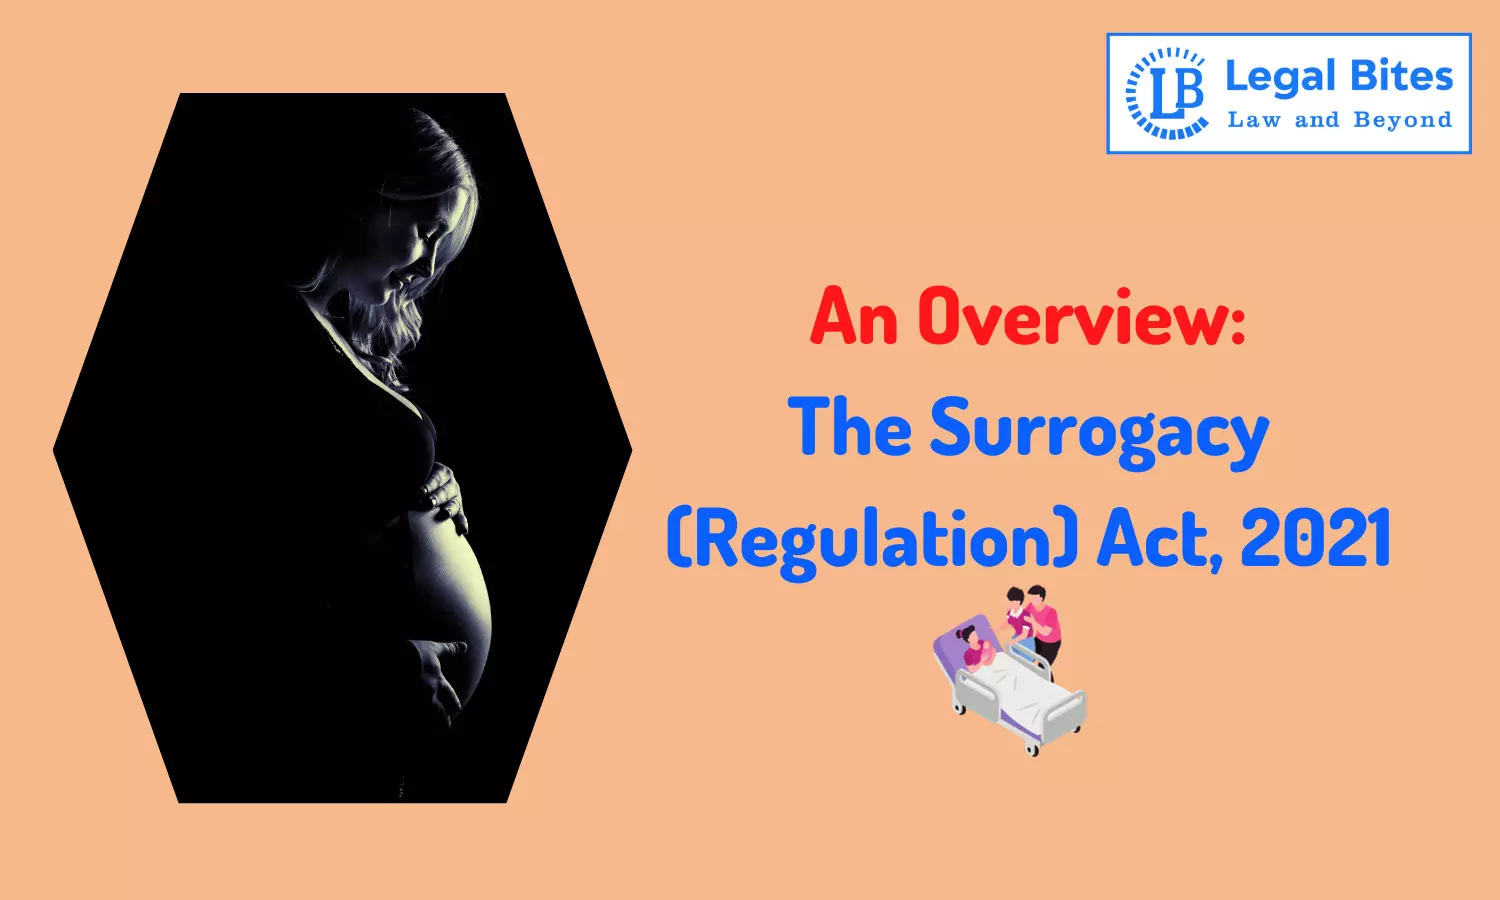 An Overview of the Surrogacy (Regulation) Act, 2021